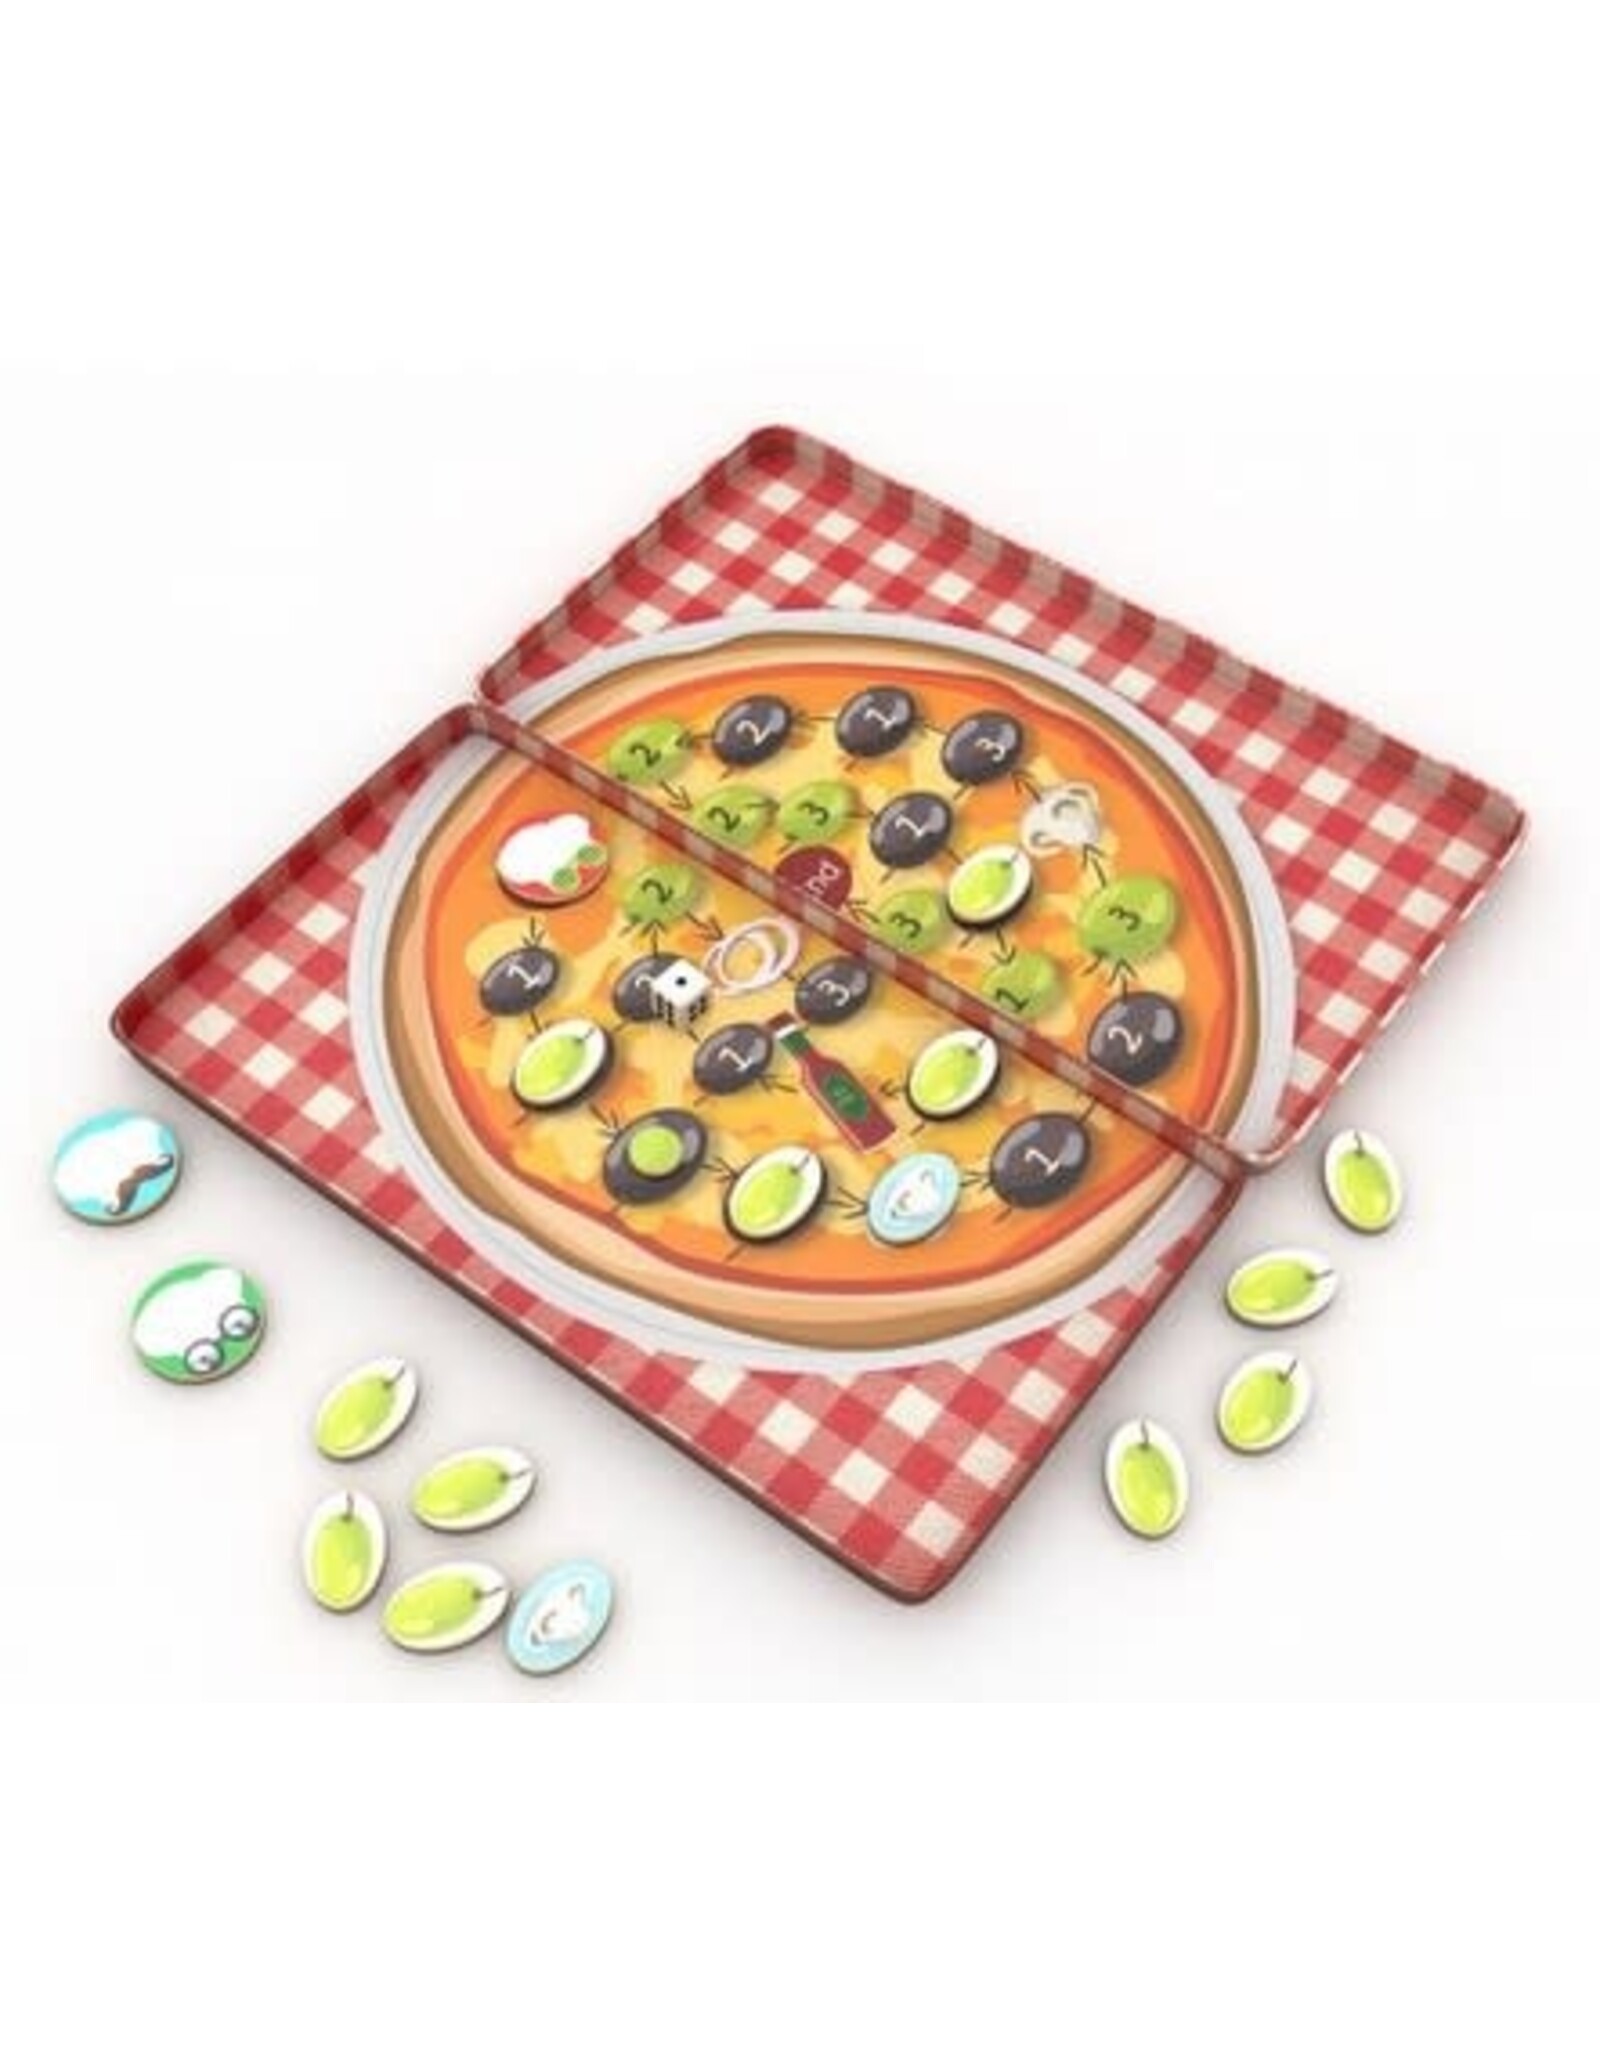 The Purple Cow Magnetic Pizza Race Travel Game